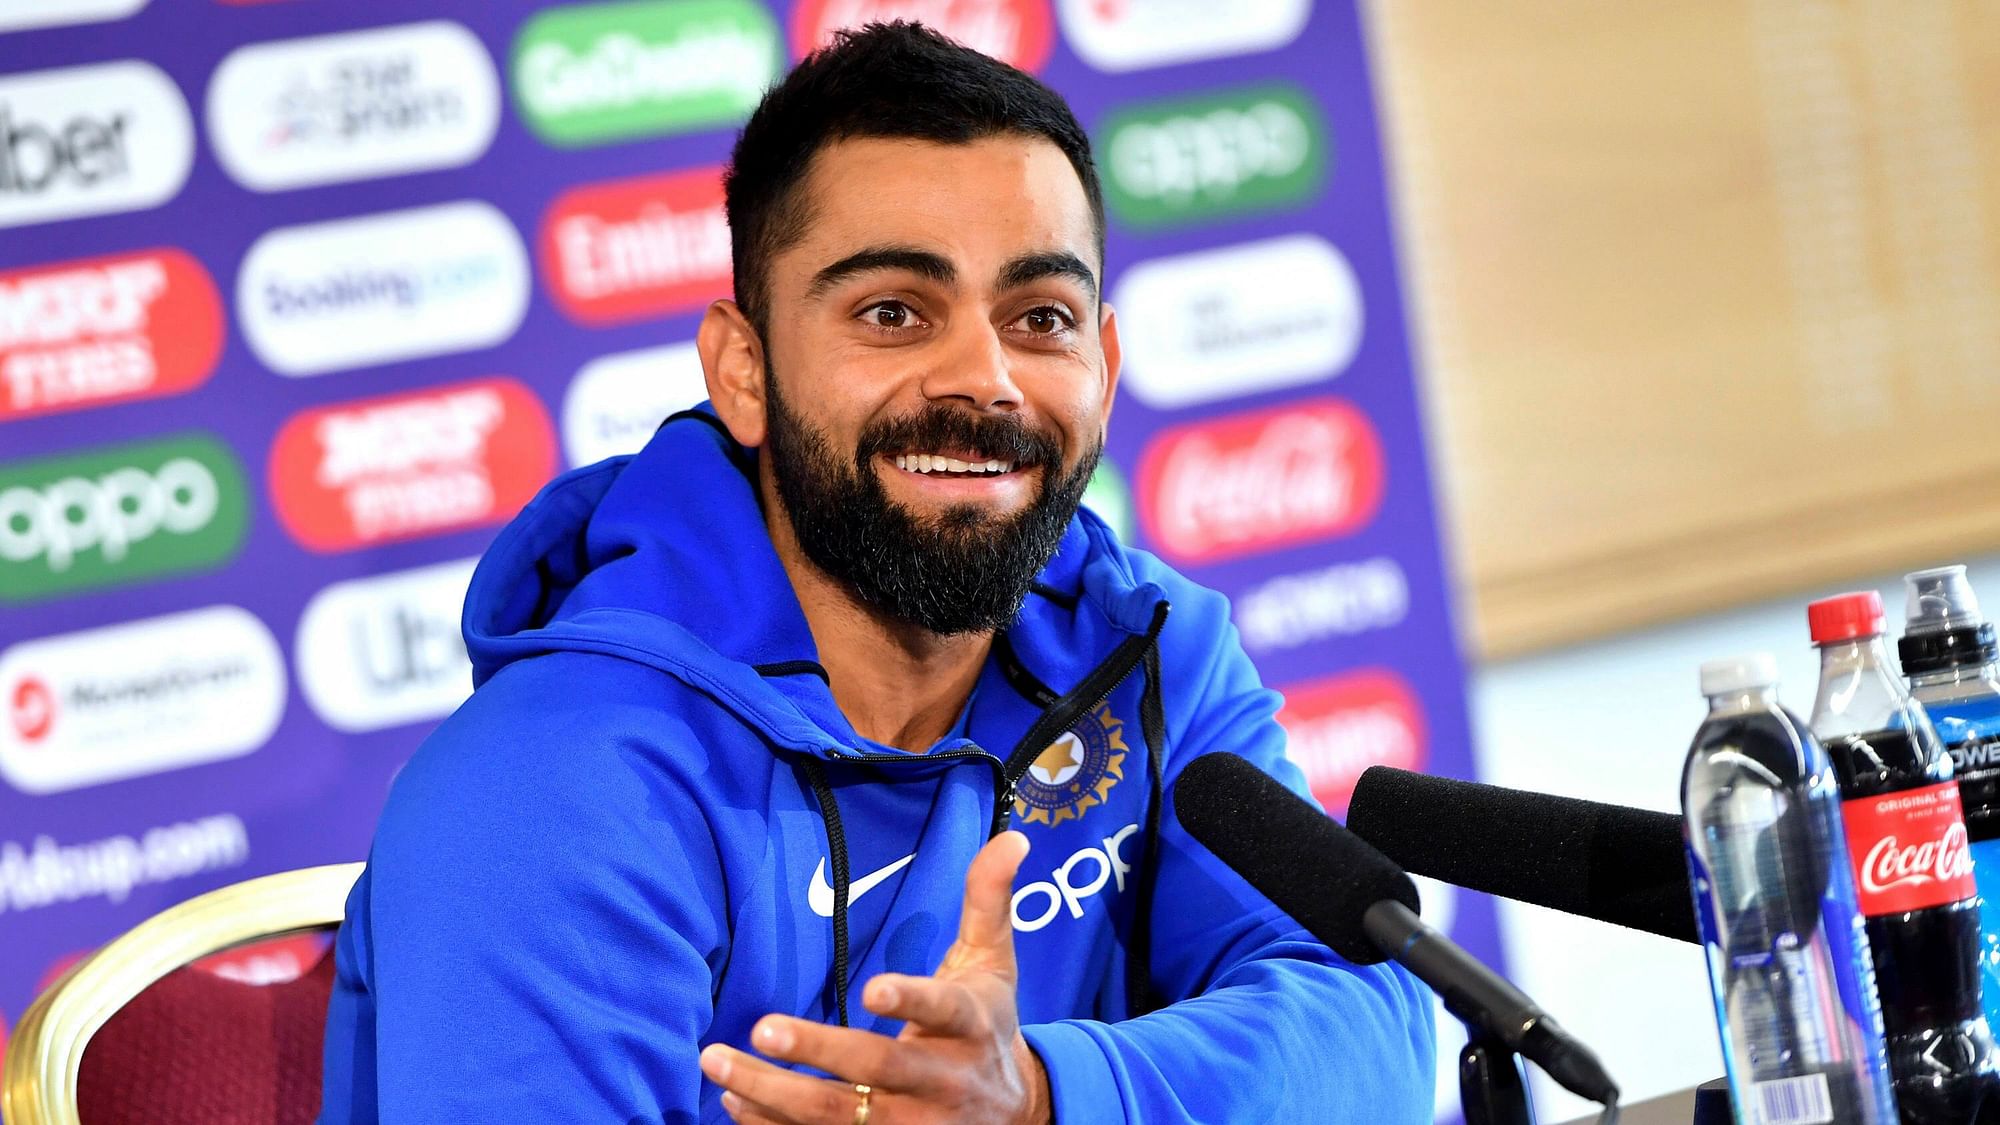 Indian skipper Virat Kohli said he is happy to take up any role the team needs of him during the ongoing ICC World Cup.